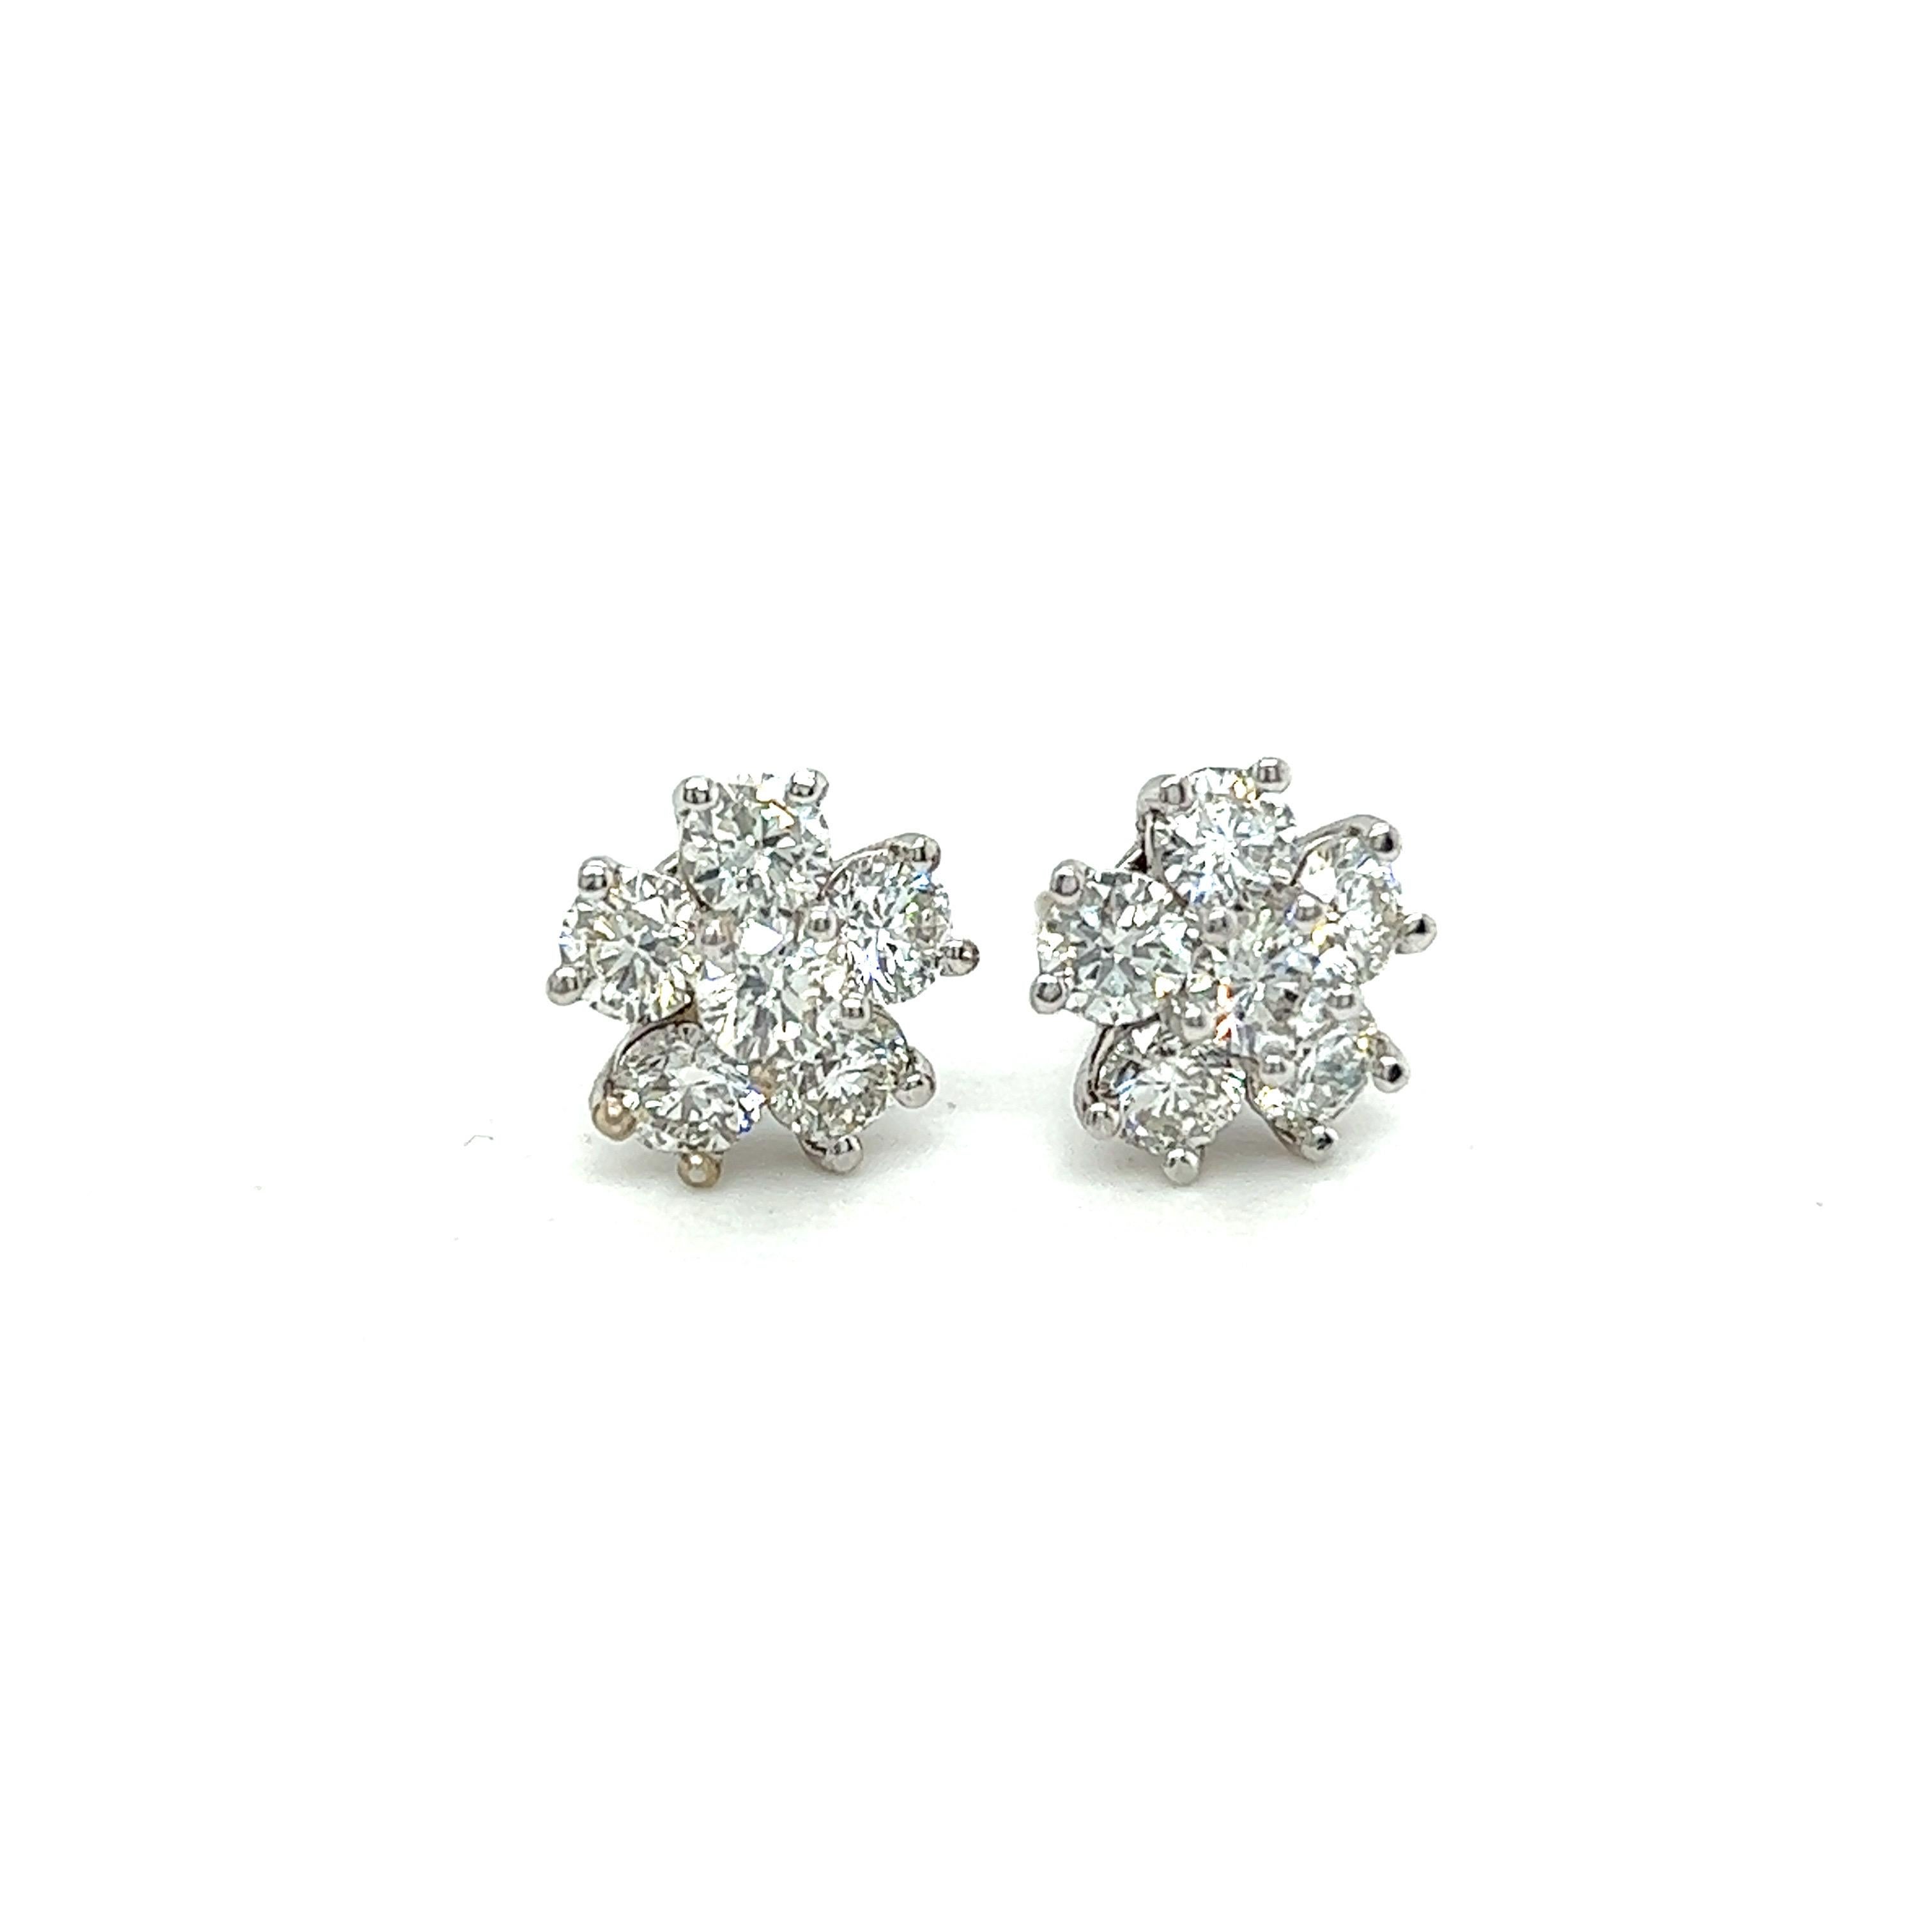 2.25ct total weight Natural Earth Mined Diamond earrings
6 Diamonds per stud are placed together to create a flower shape 12 diamond stones in total
14k white gold
ESTATE 
Made in Miami